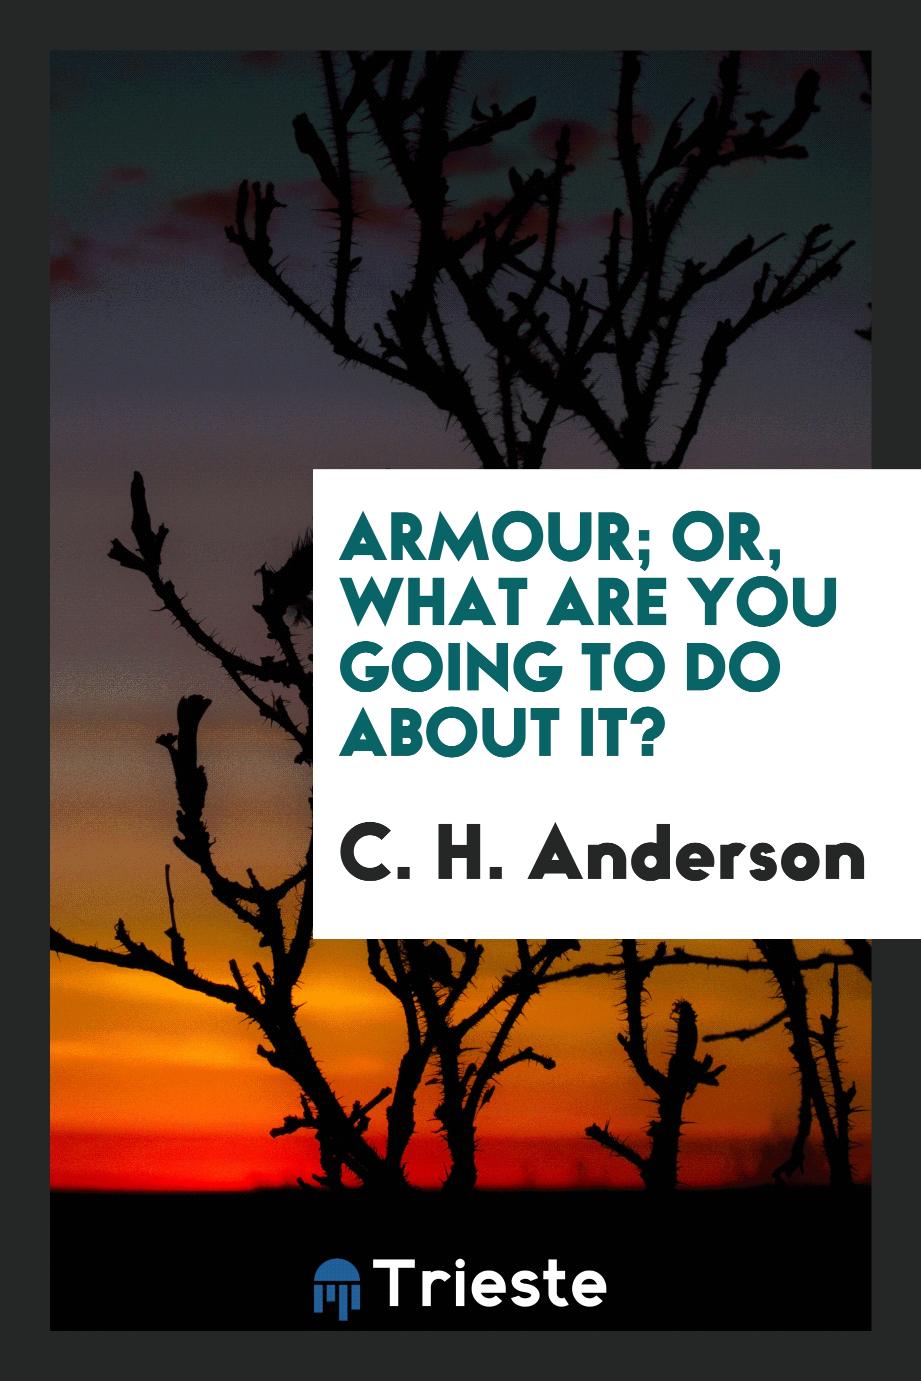 Armour; or, What are you going to do about it?